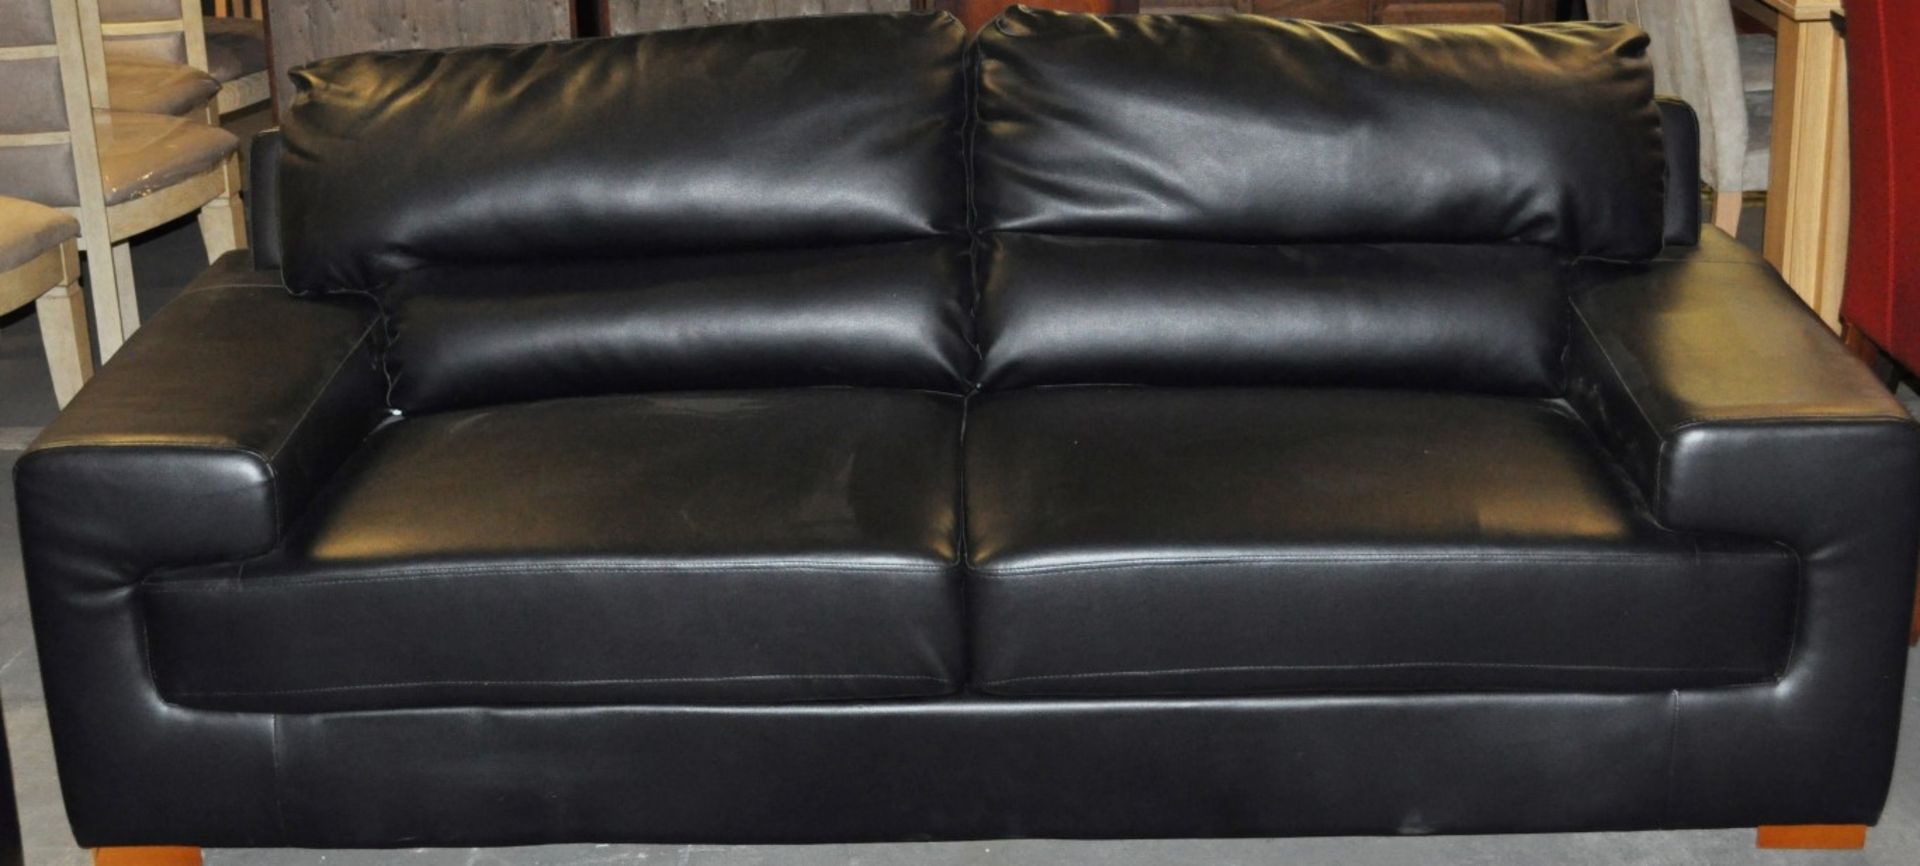 1 x Black 3 & 2 Seater Sofa Harry Suite Designed by Mark Webster – Ref : CH151 - Arms Fold Over - Image 2 of 6